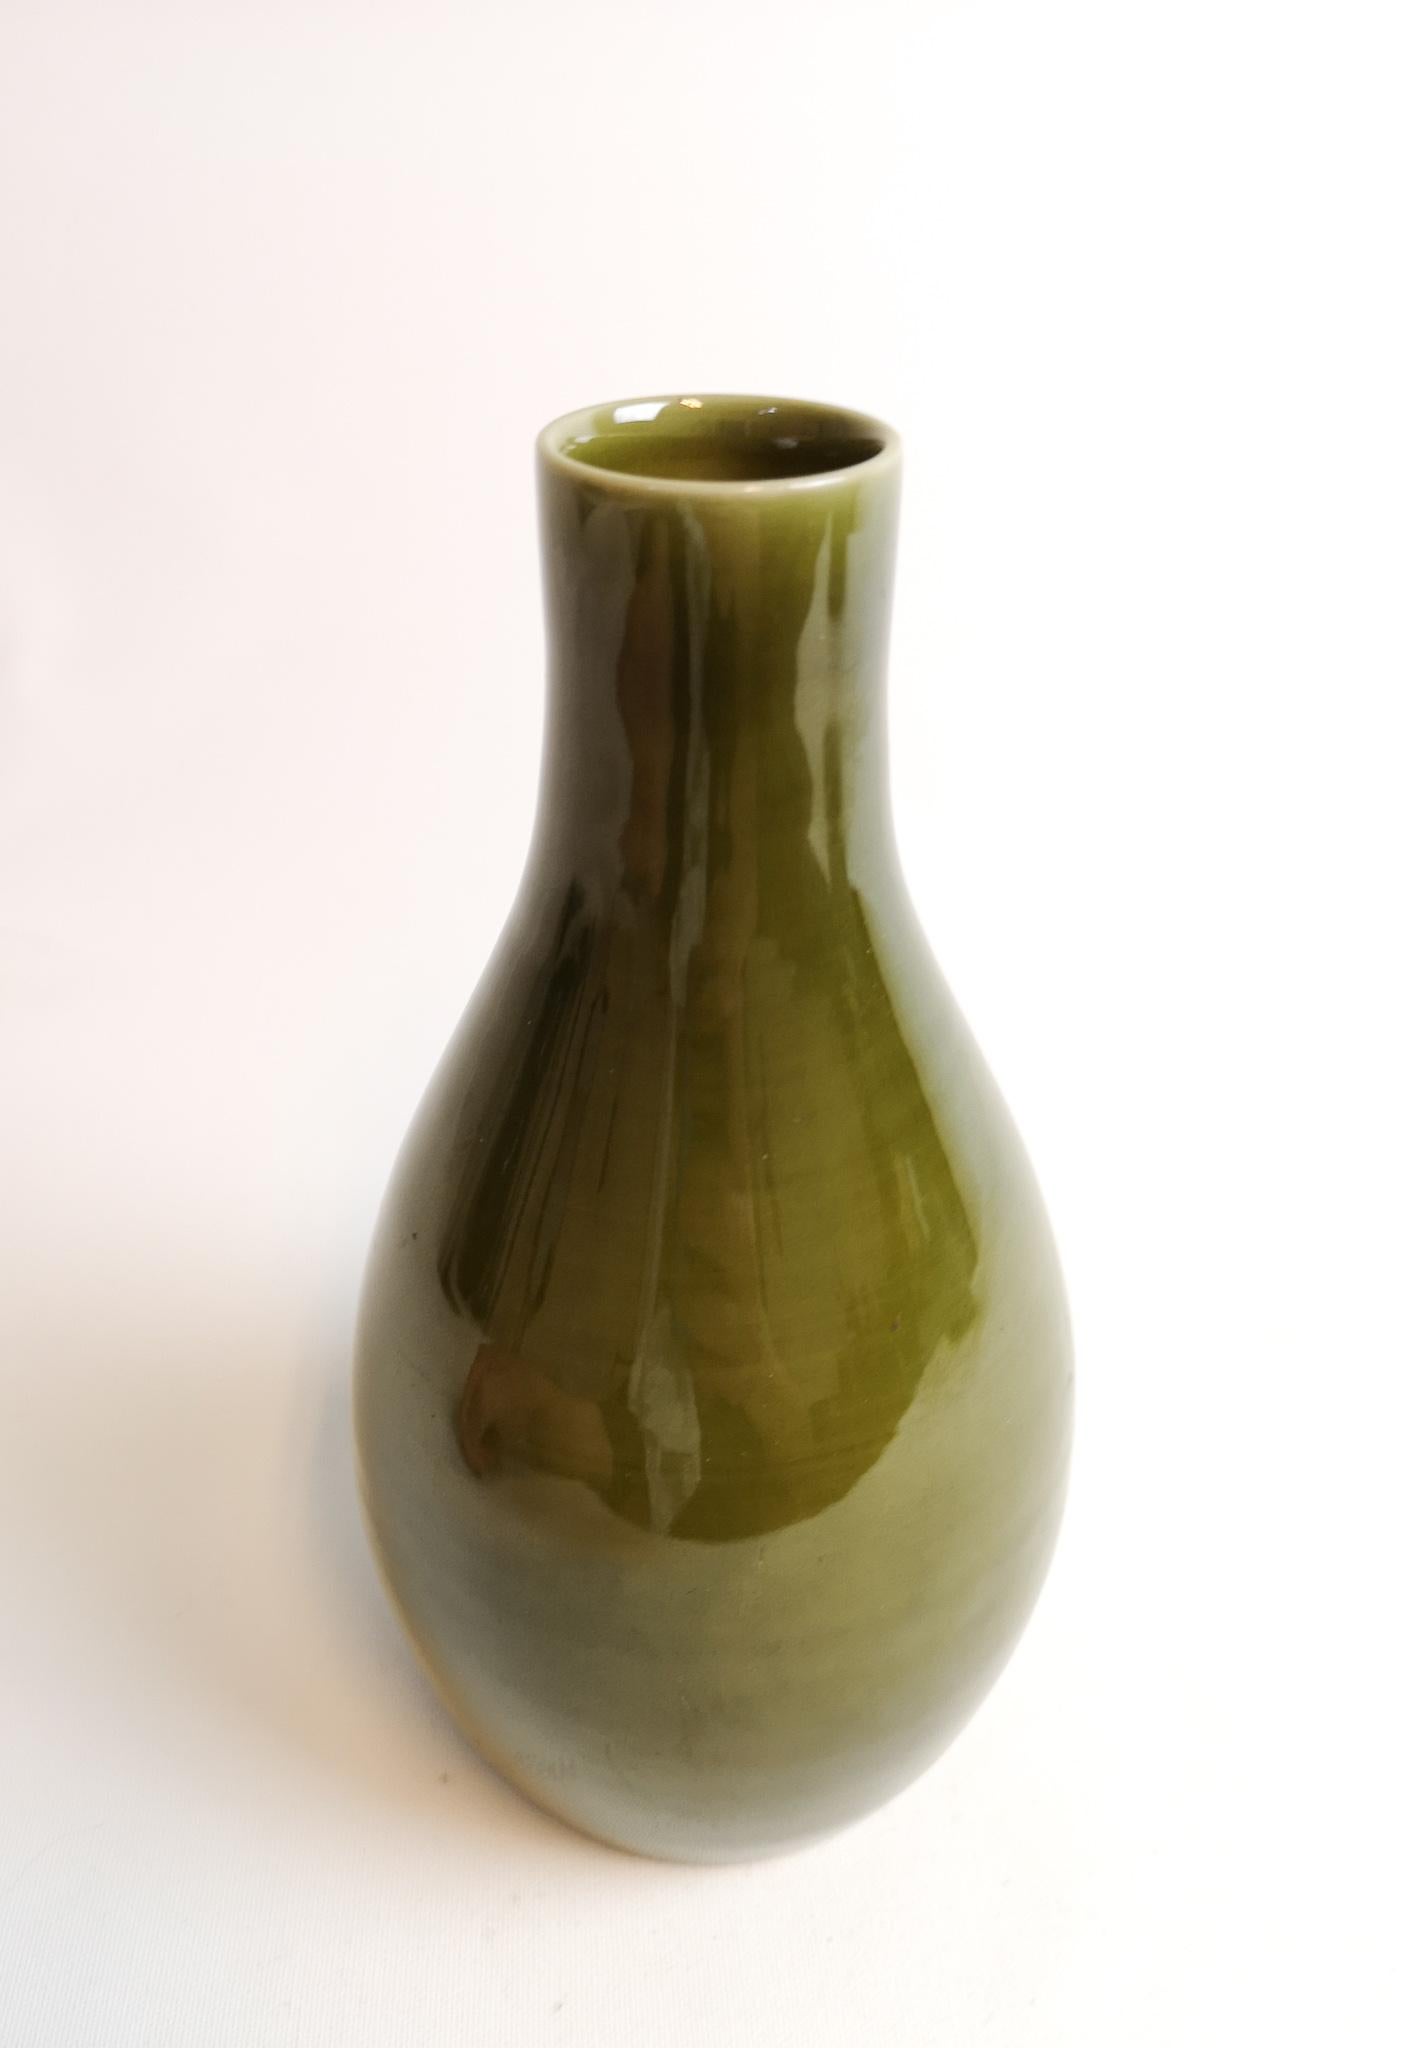 Very nice green colored vase from Rörstrand and maker/designer Carl Harry Stålhane. Made in Sweden in the midcentury. Beautiful glazed vases in good condition.


Measures: H 19, D 11 cm.